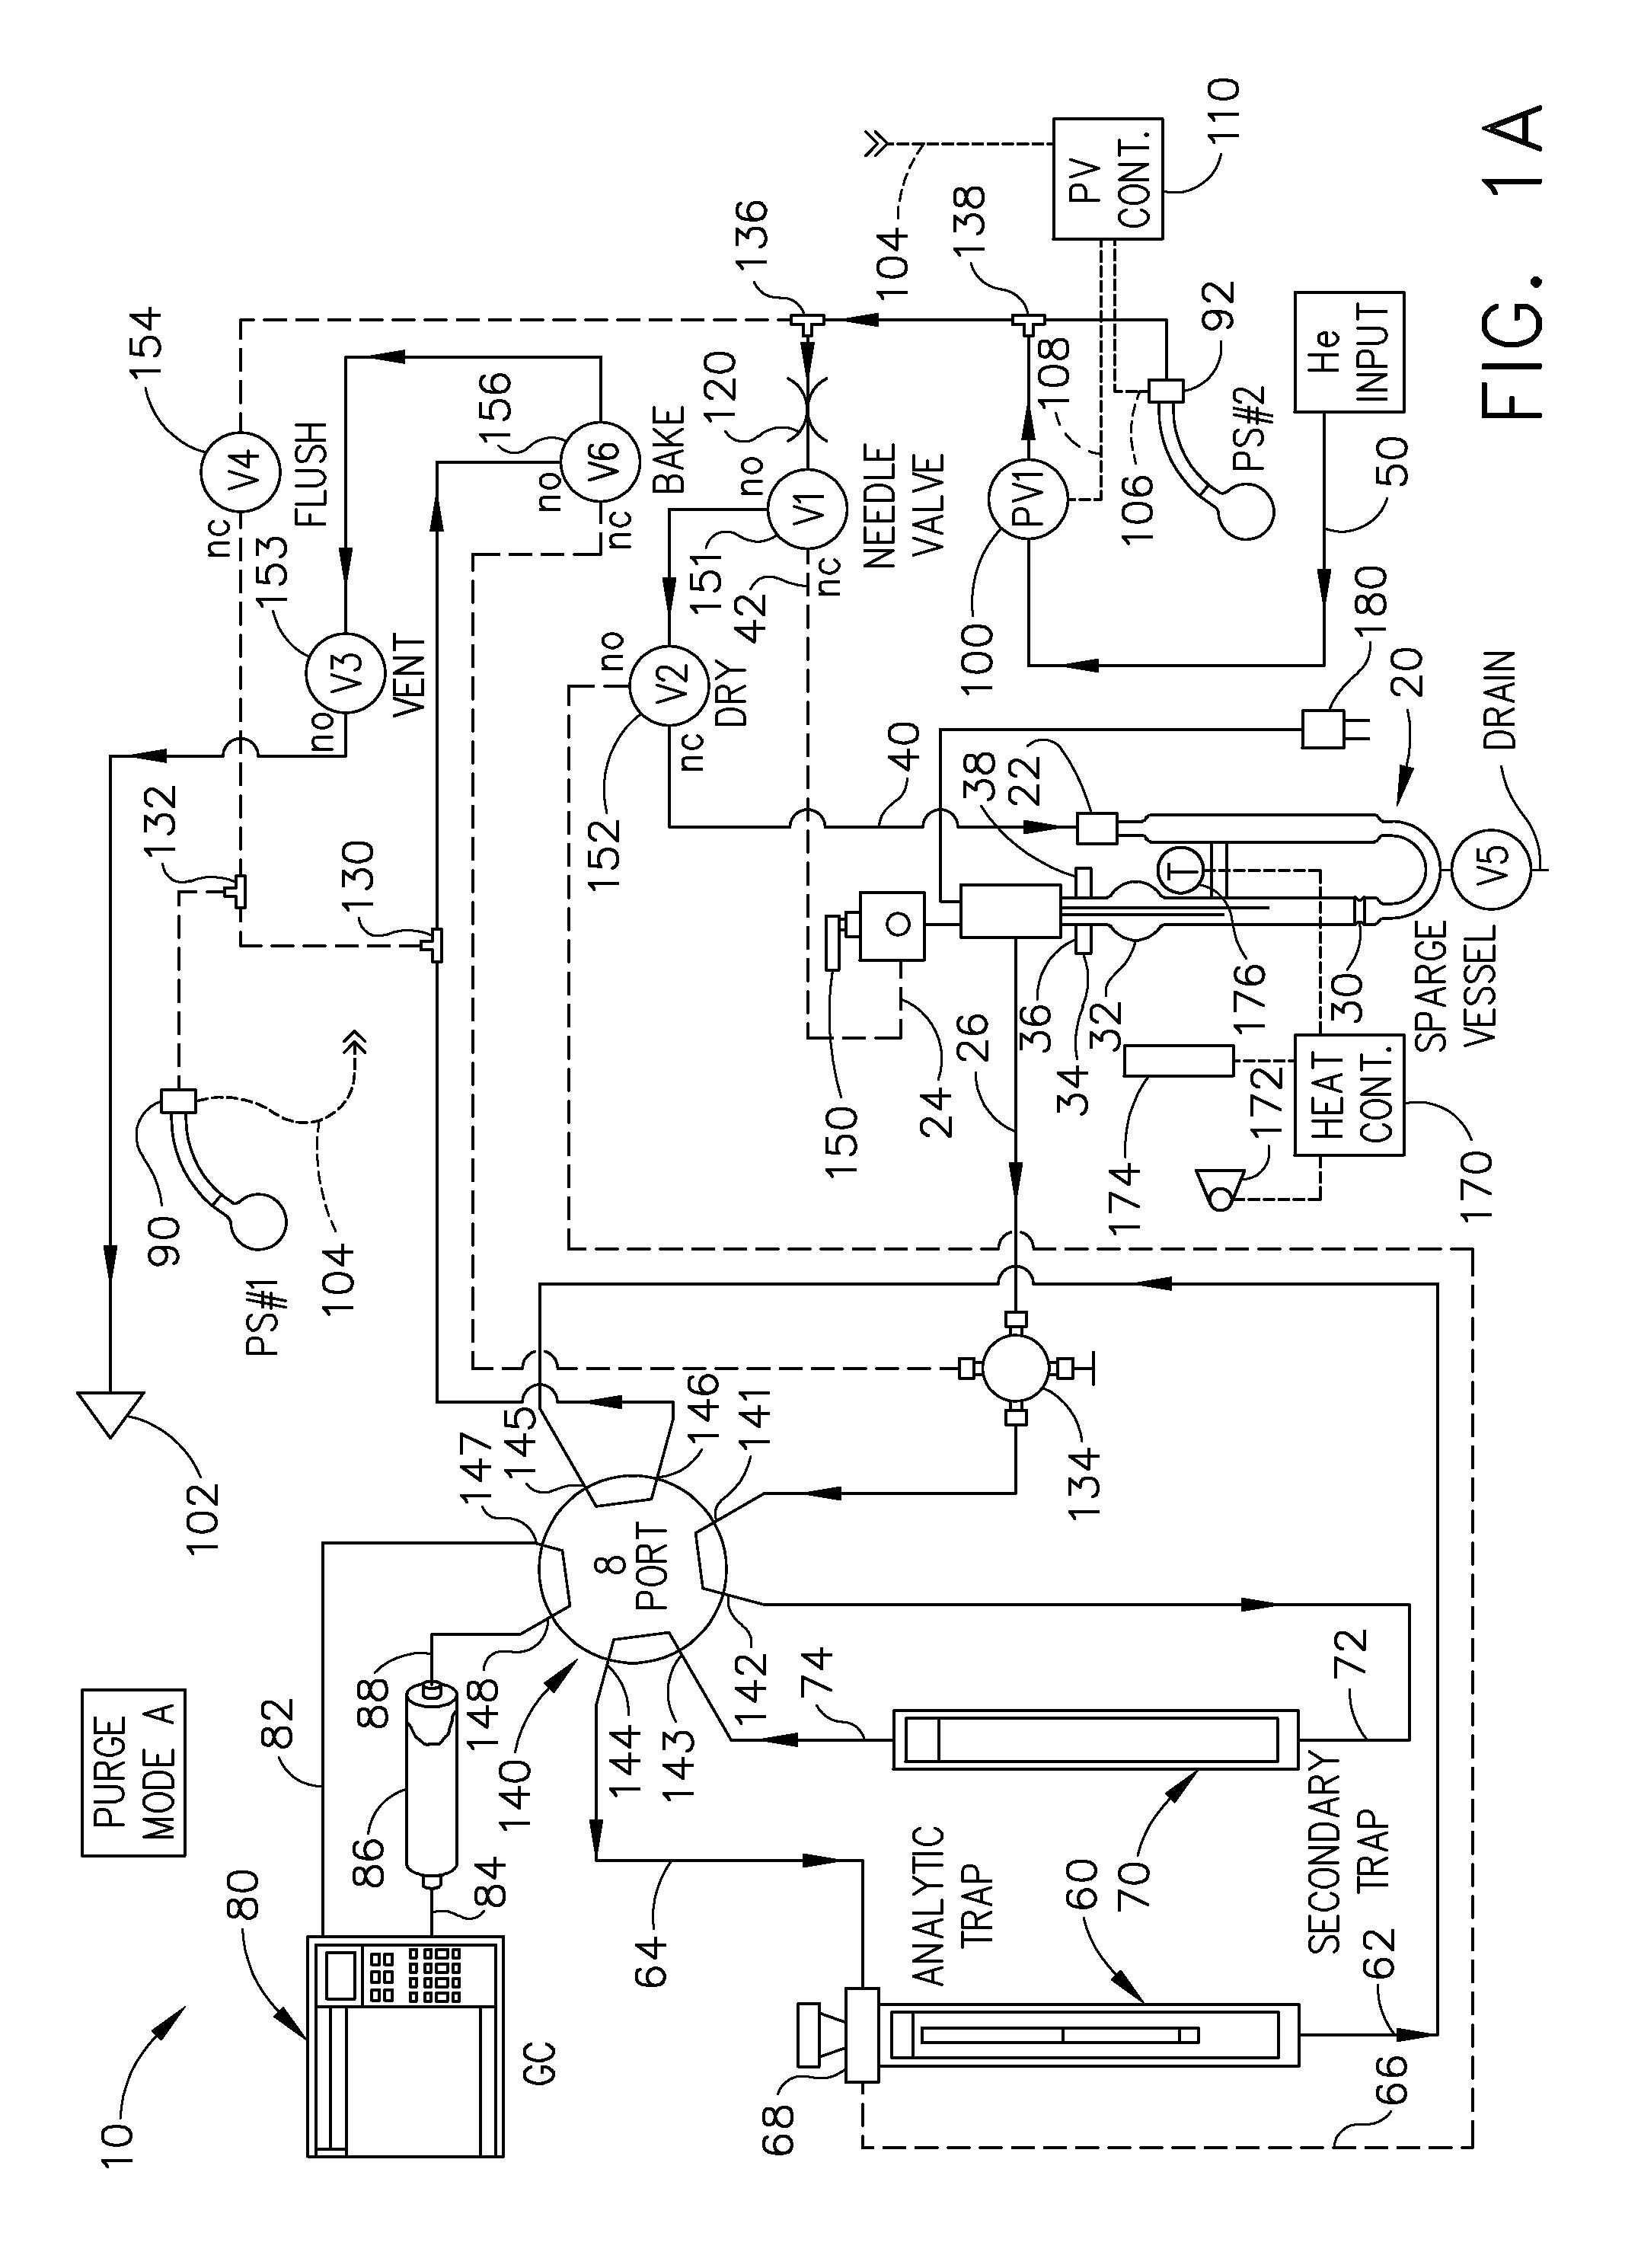 Purge and trap concentrator with sparge vessel